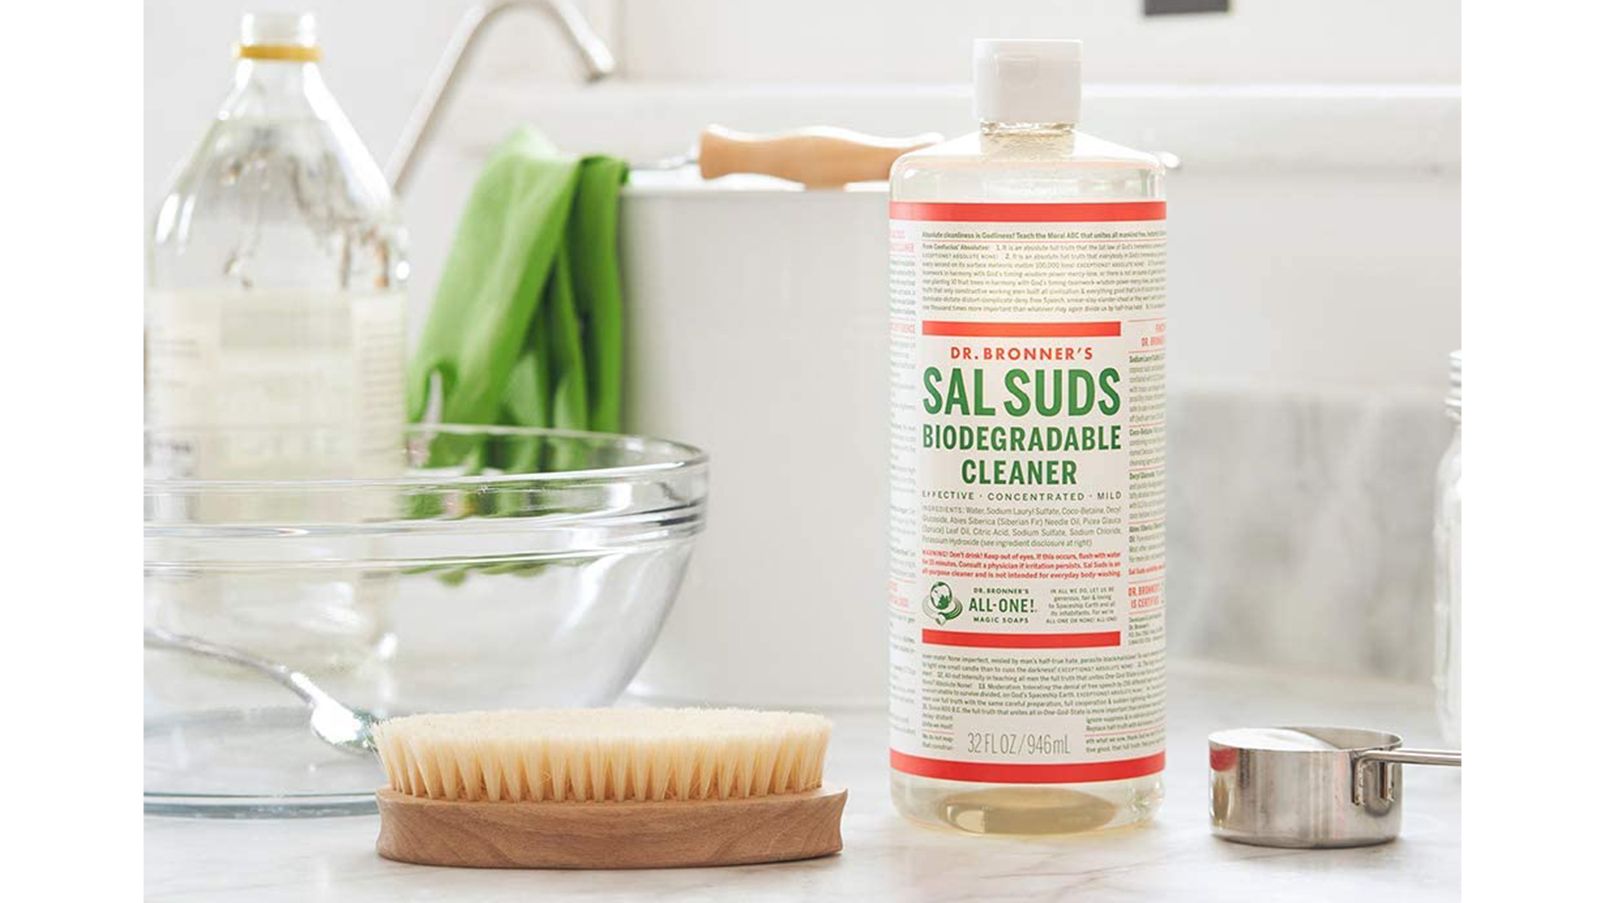 https://media.cnn.com/api/v1/images/stellar/prod/210825102610-all-natural-cleaning-products-salsuds.jpg?q=w_1605,h_903,x_0,y_0,c_fill